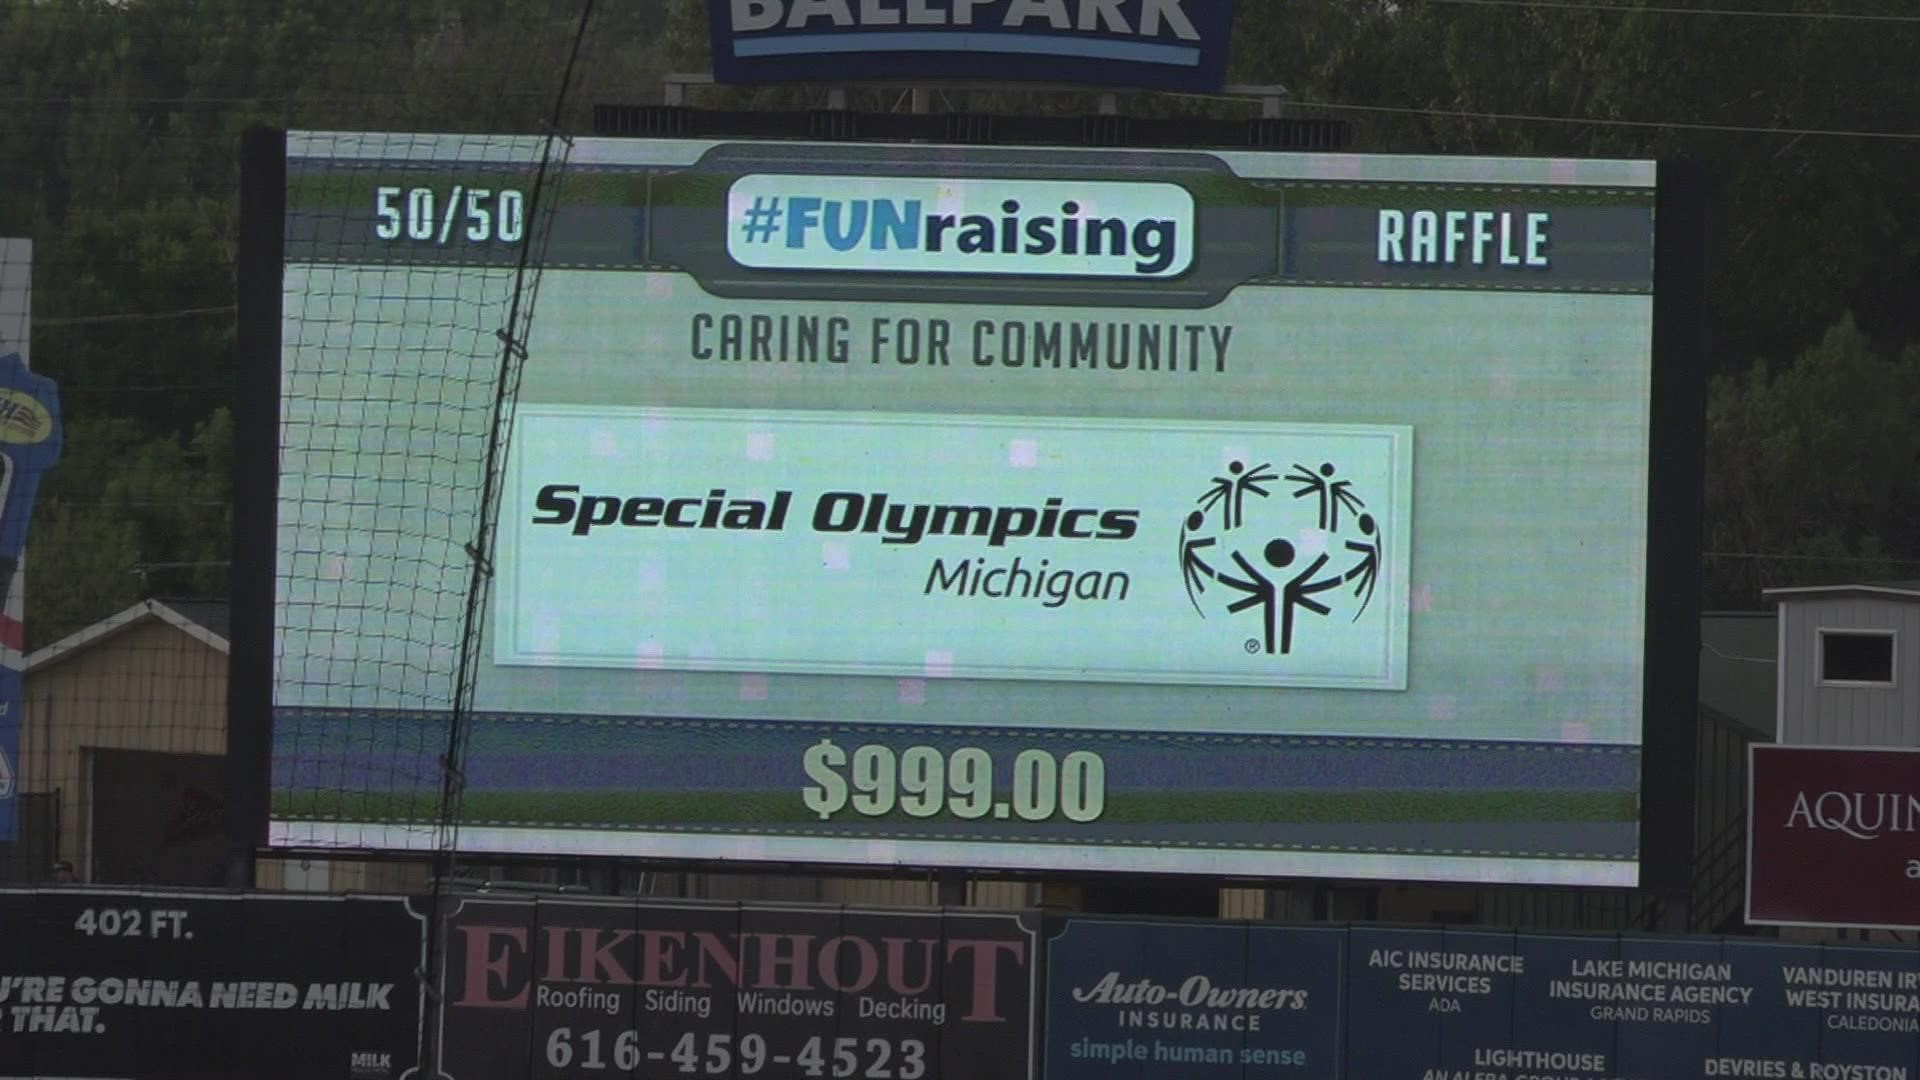 The promotion served as an opportunity to help fundraise for Special Olympics Michigan.